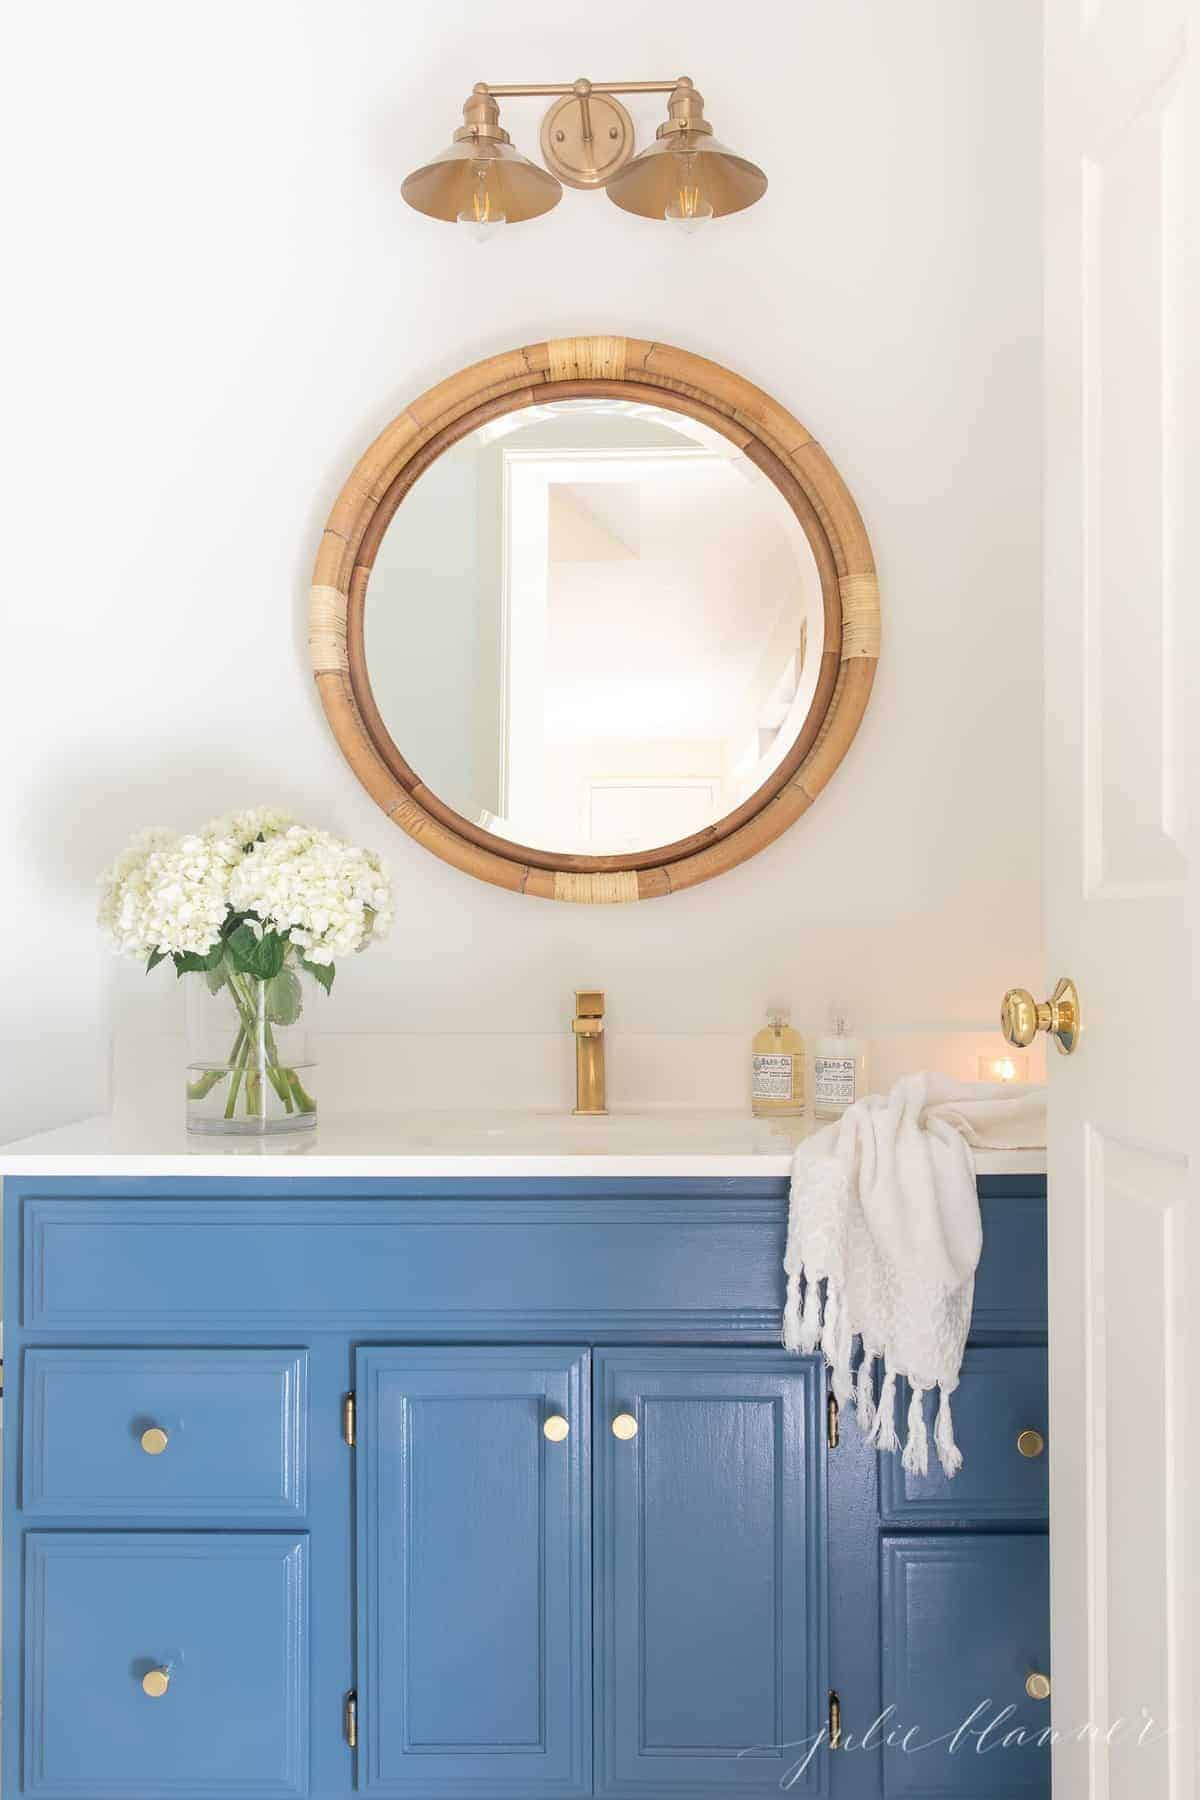 A nautical style bathroom with a blue vanity, gold cabinet door knobs.